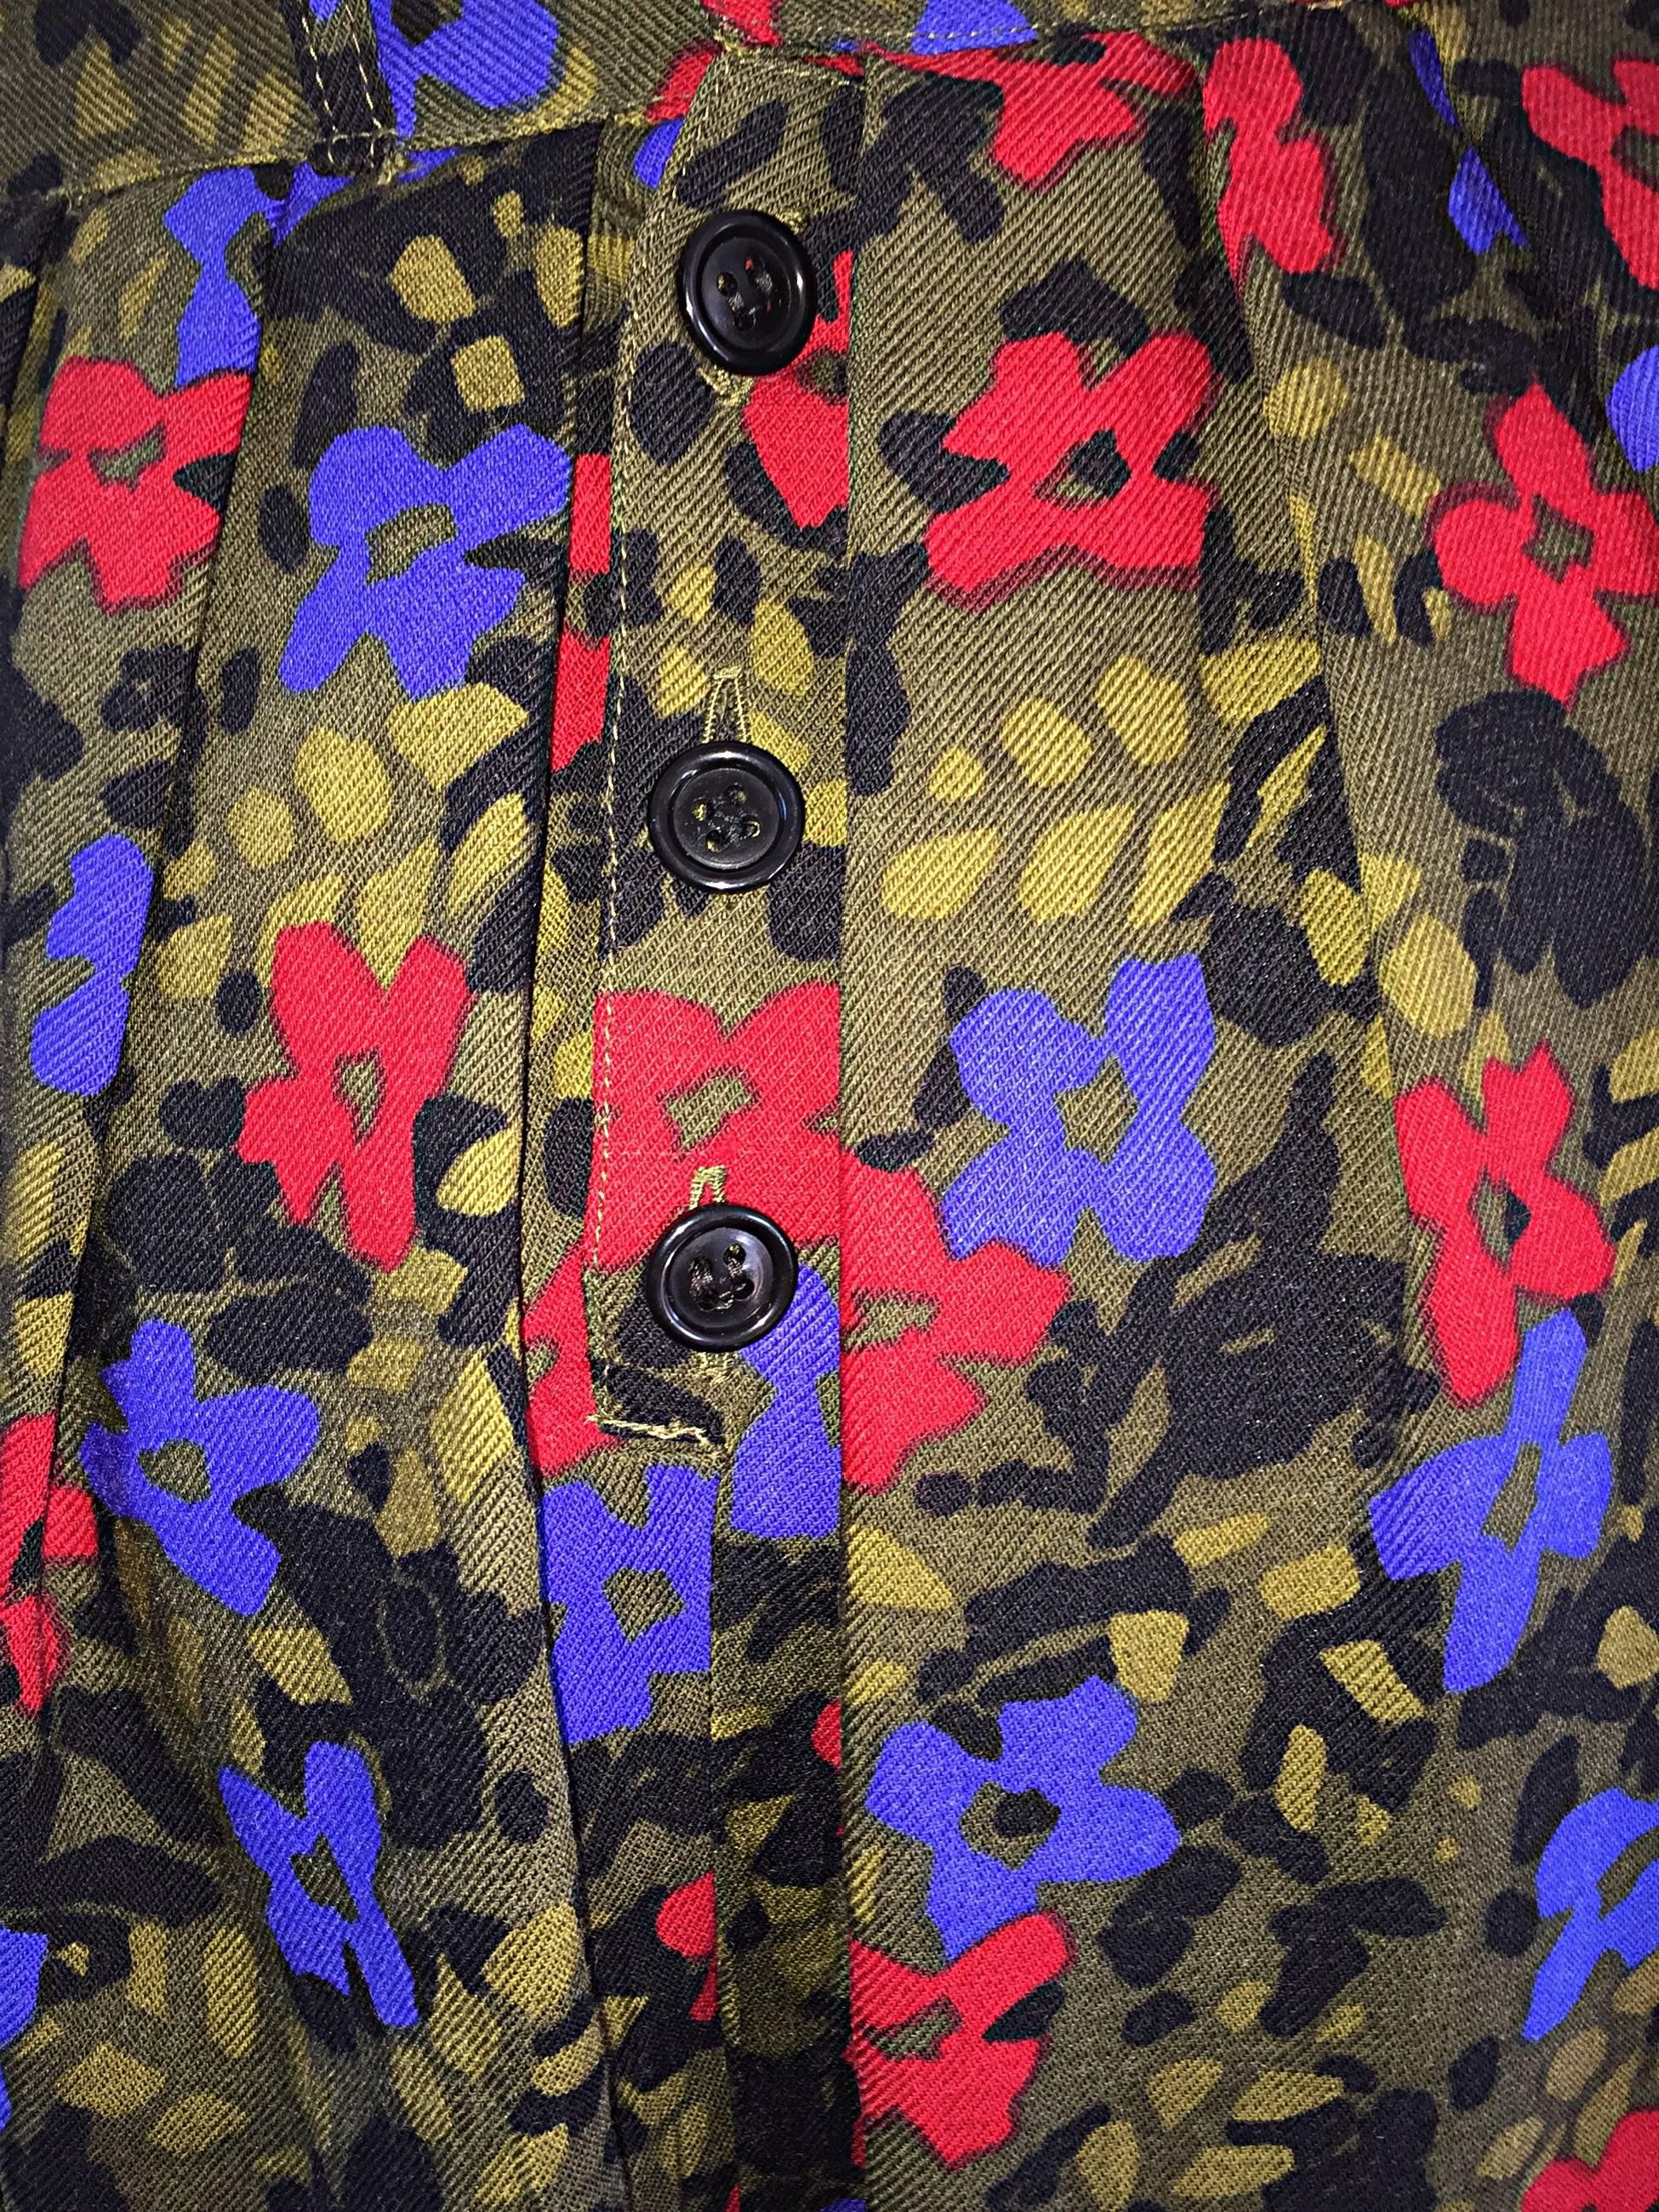 Vintage Guy Laroche Pleated Wool Skirt w/ Flowers + Leaves Made in France In Excellent Condition For Sale In San Diego, CA